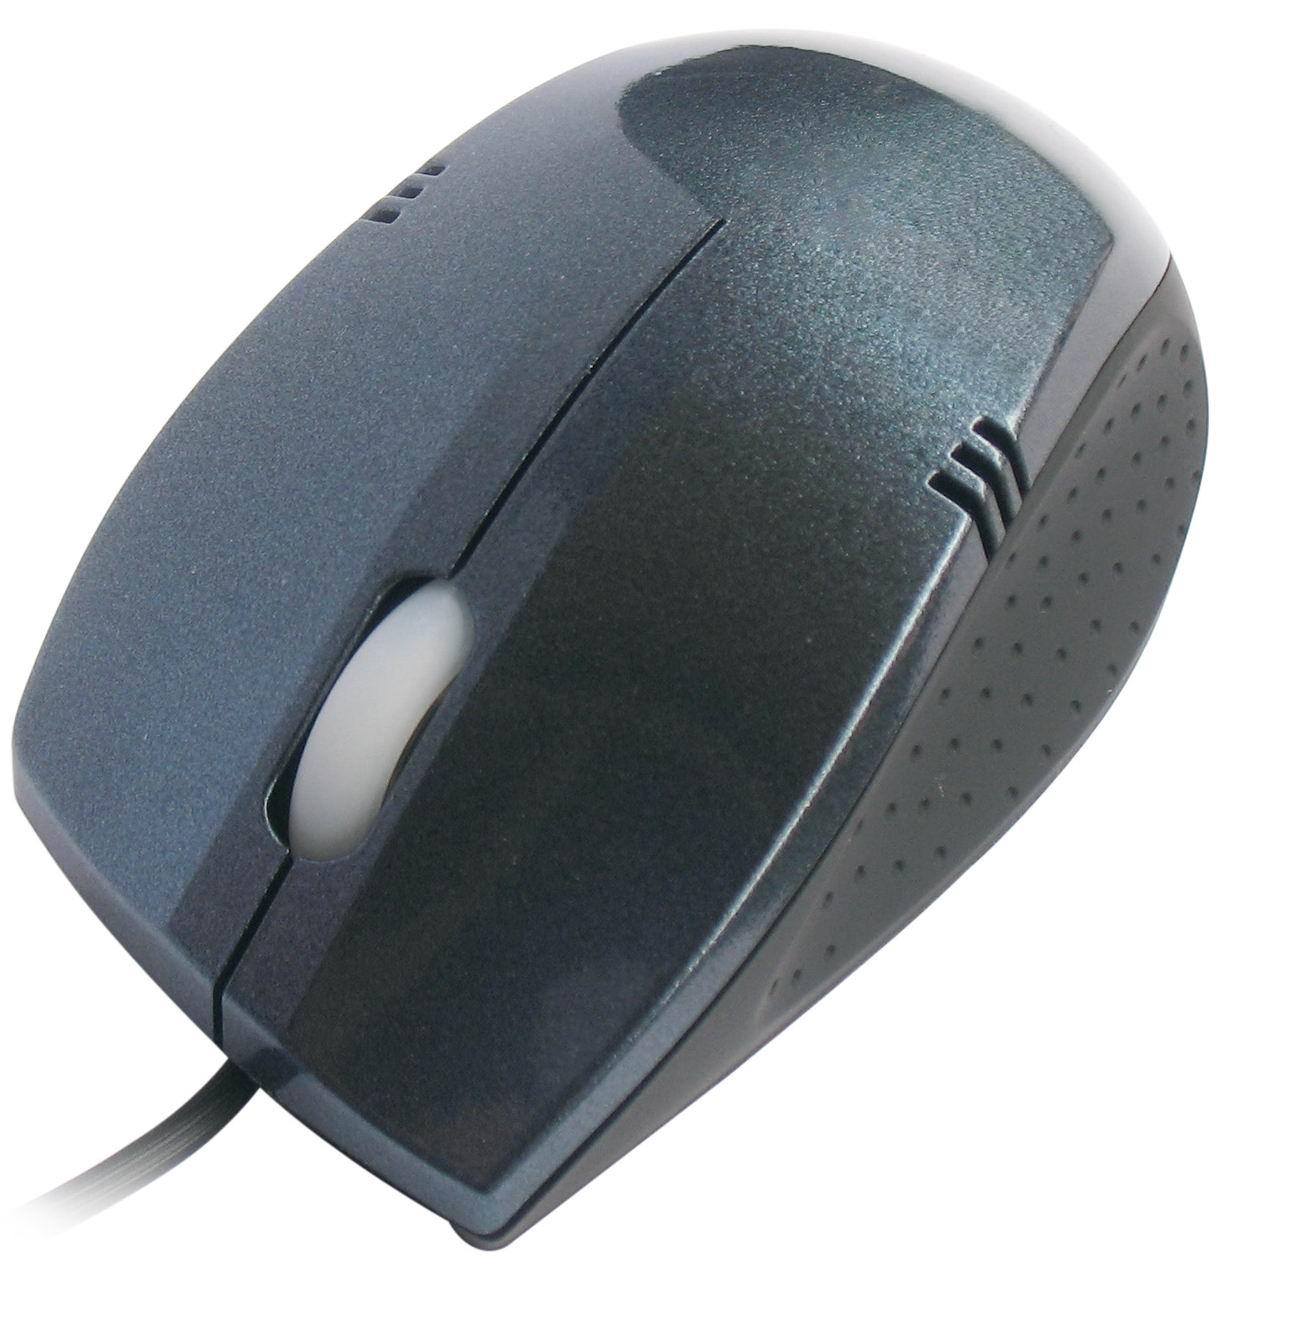 Buy cheap Optical Mouse (JM03) from wholesalers